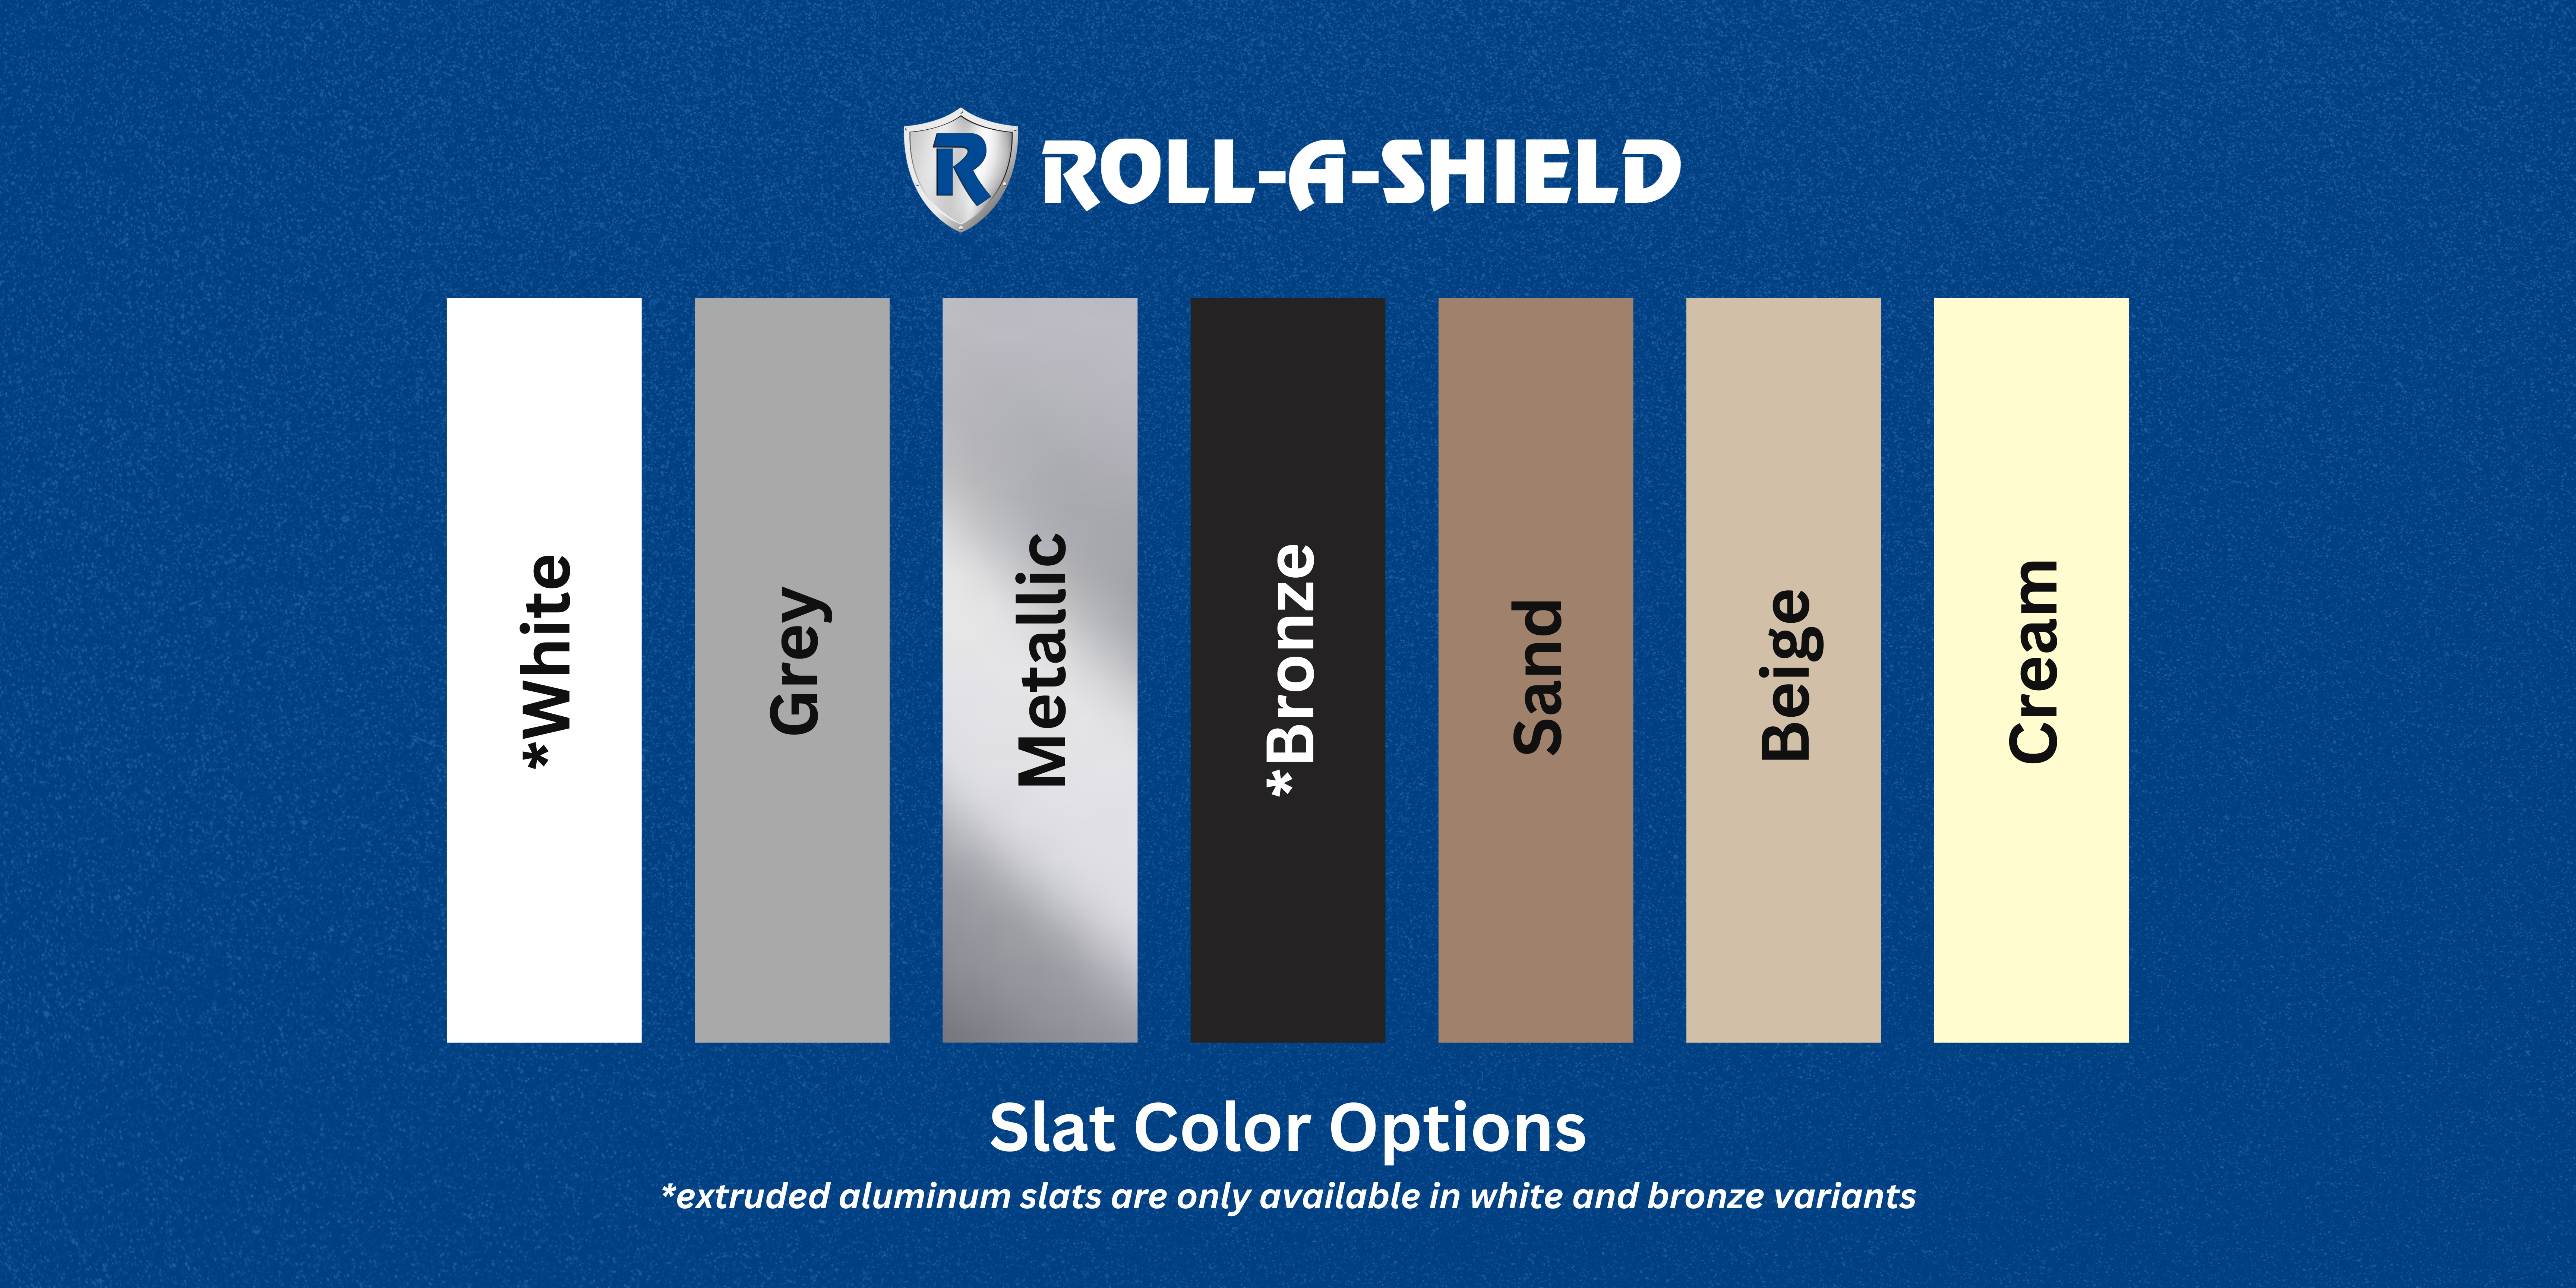 An image showing color options for extruded aluminum slats for rolling shutters